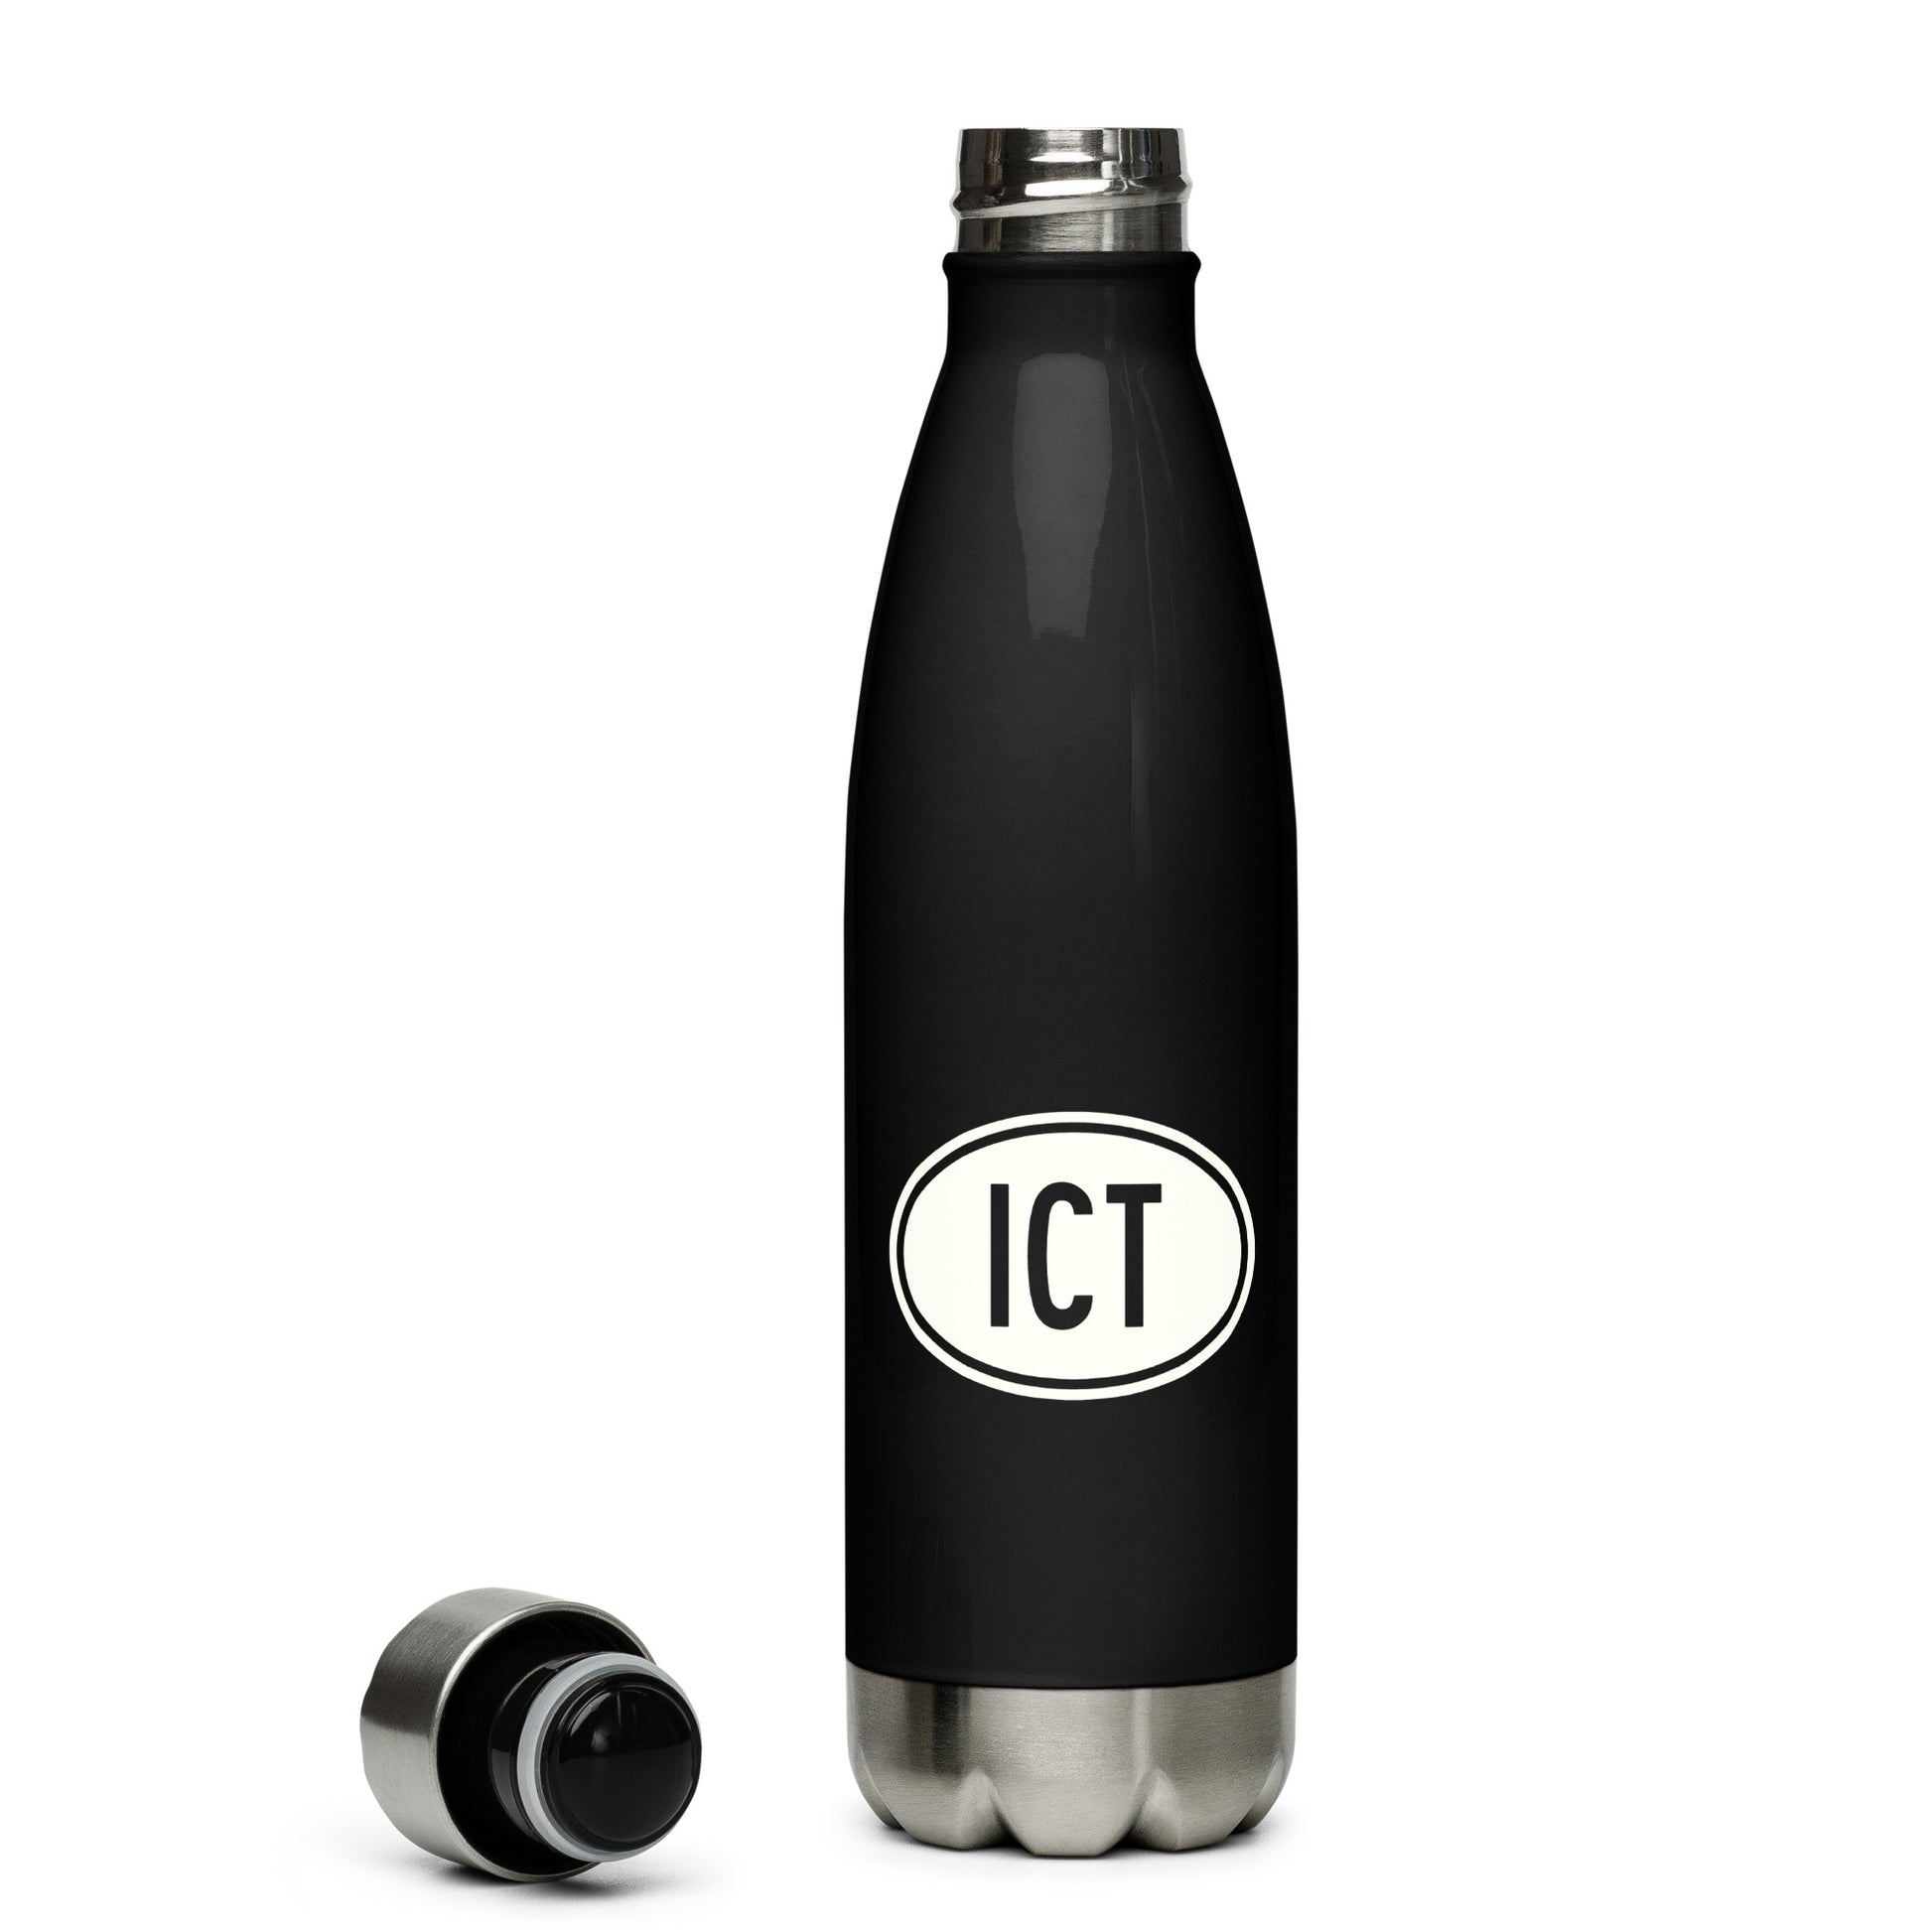 Unique Travel Gift Water Bottle - White Oval • ICT Wichita • YHM Designs - Image 04